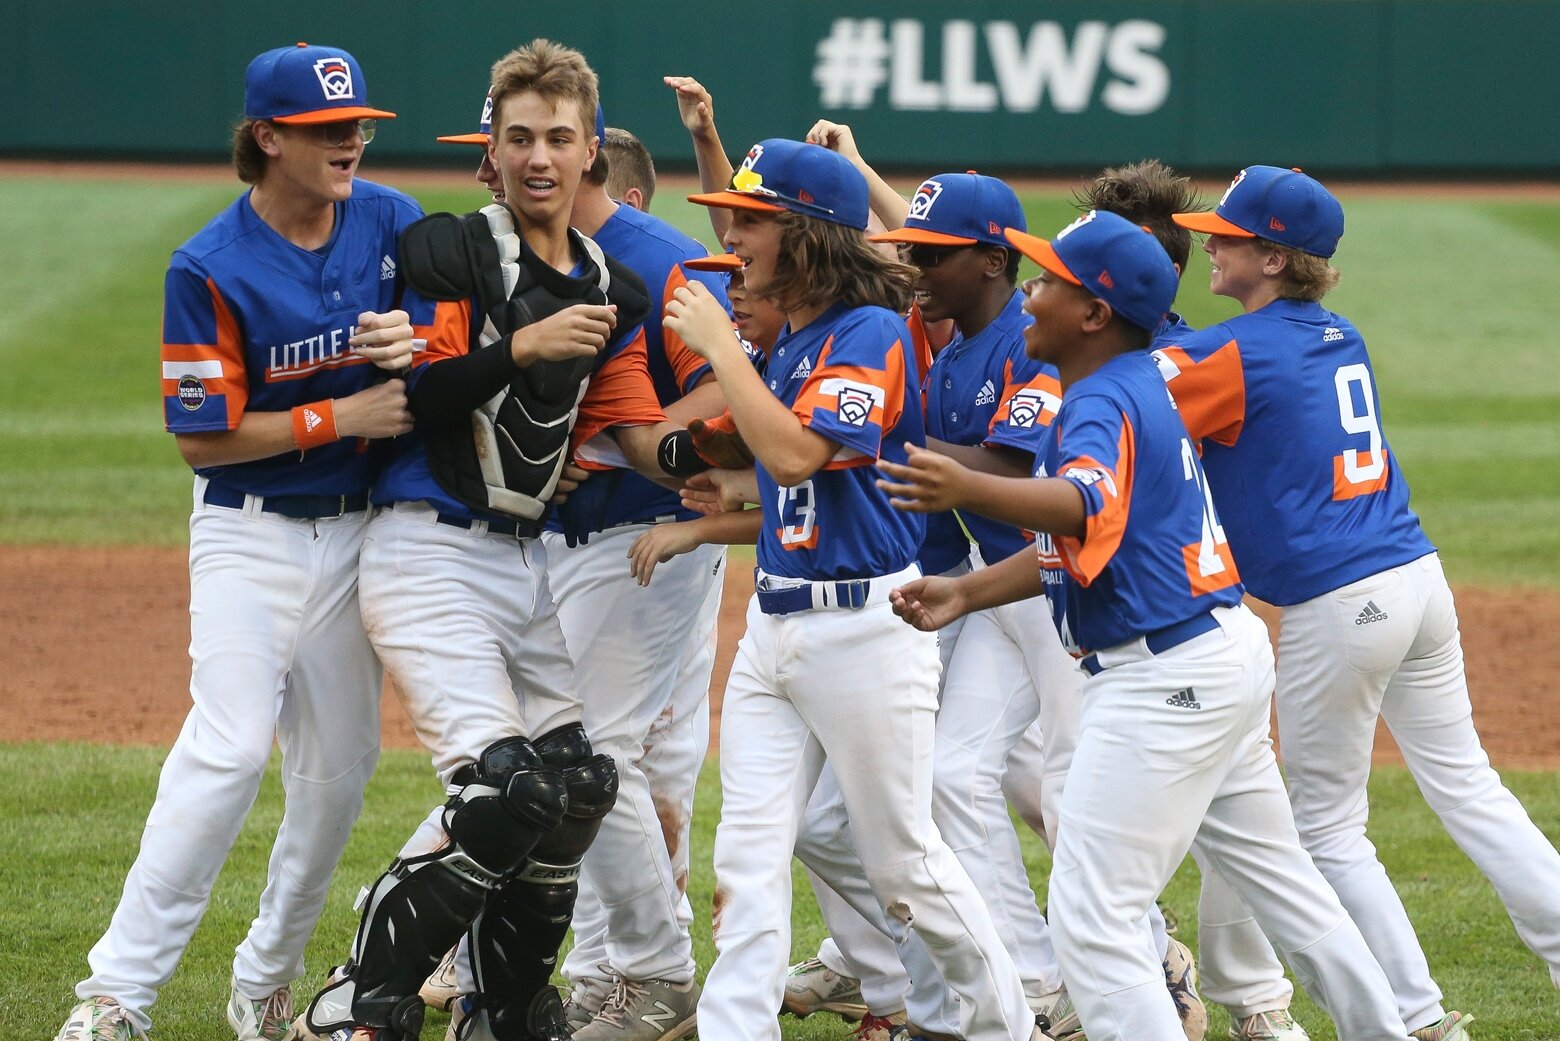 Little League World Series How to watch, bracket, new format explained